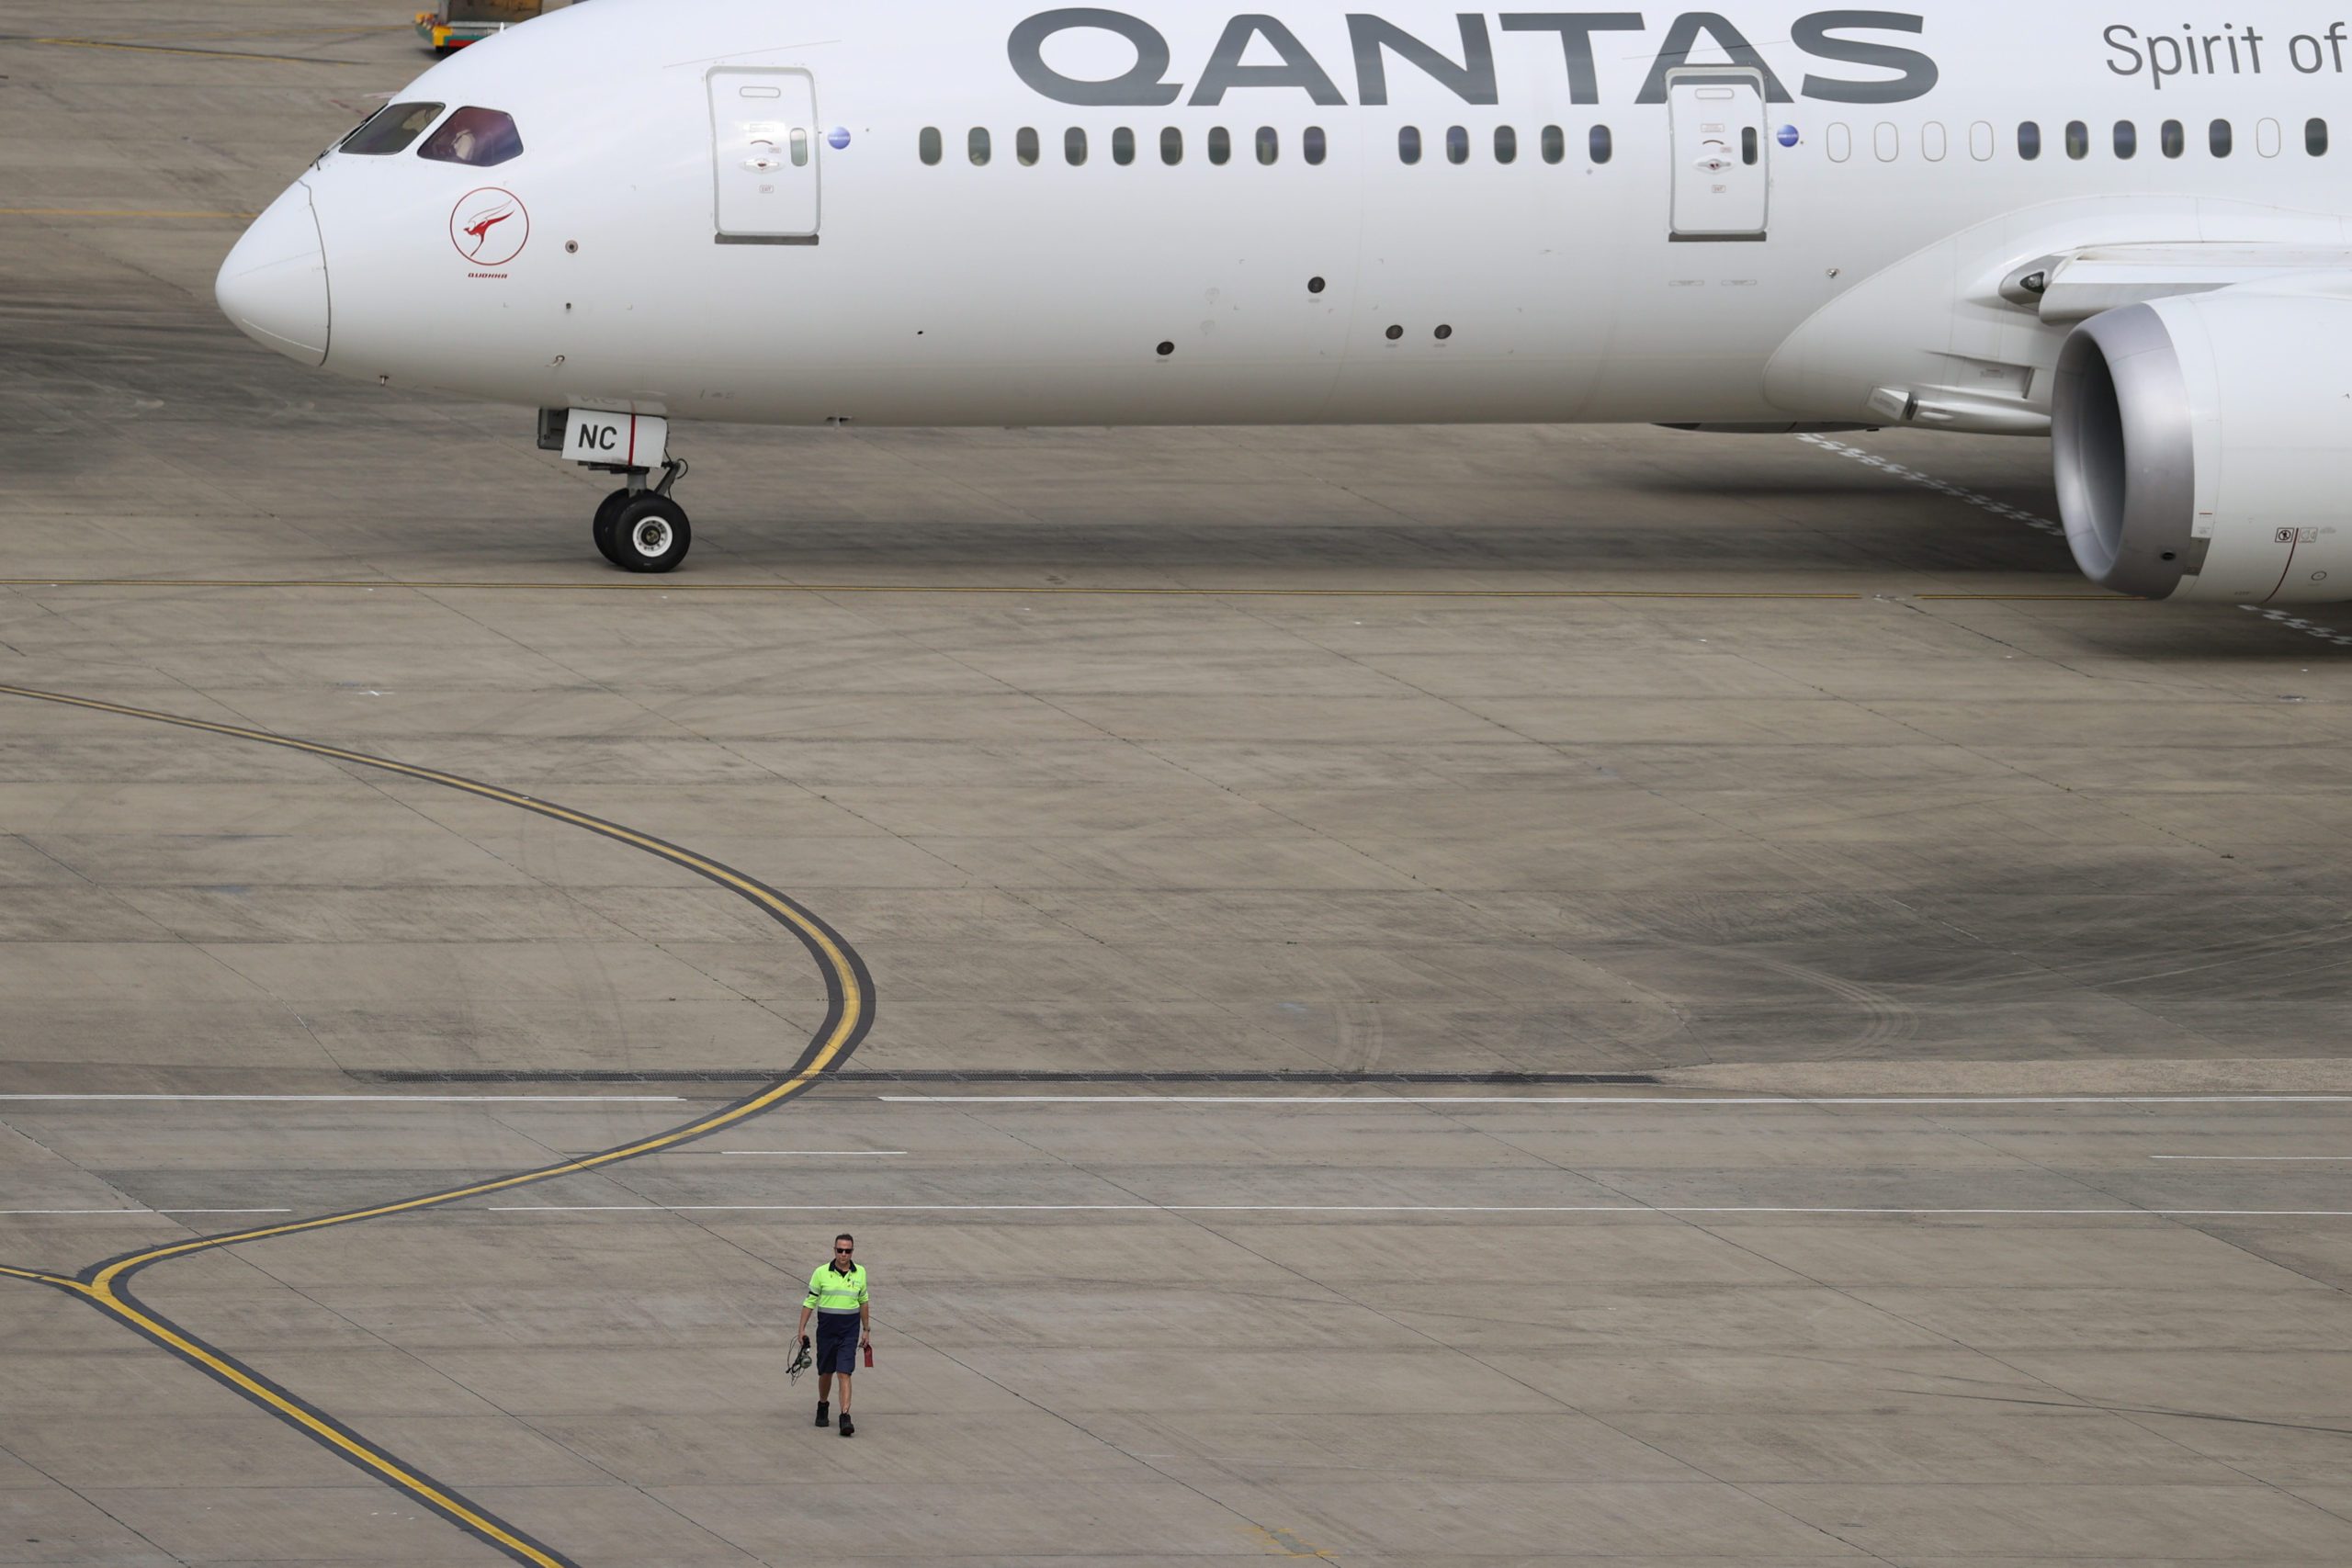 Qantas CEO to step down early as airline's reputation under scrutiny